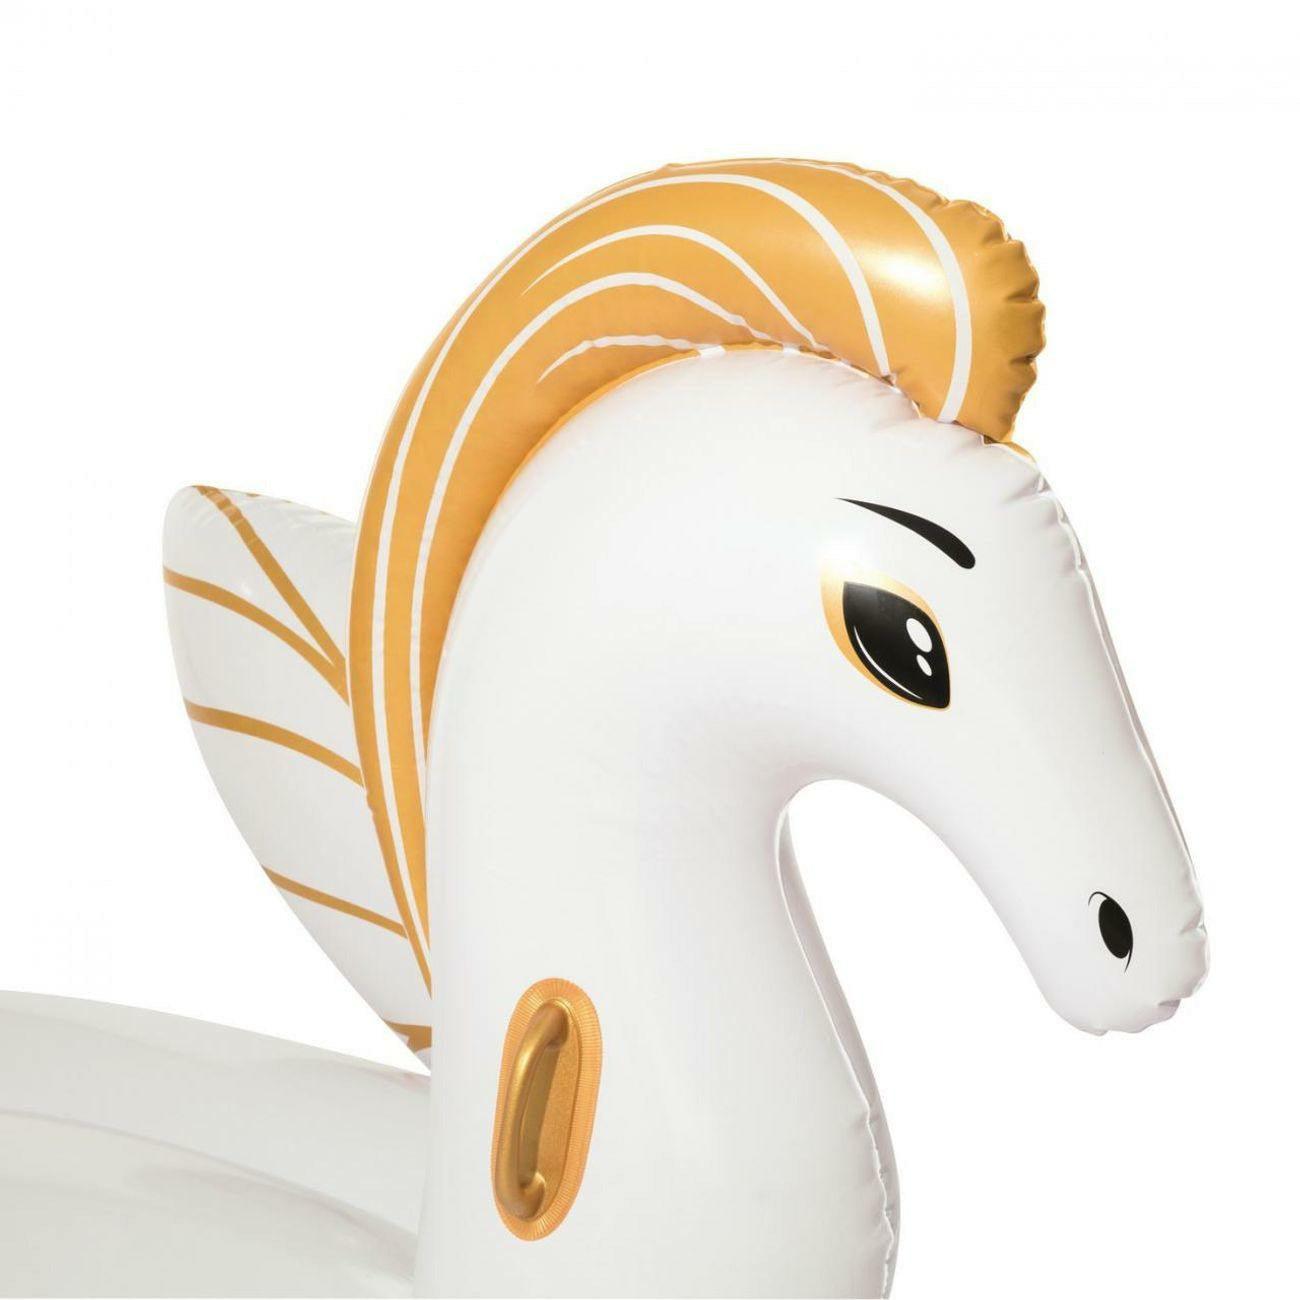 Bestway 41118 Pegasus Shaped Inflatable Ride-On Float - White & Gold - BumbleToys - 8-13 Years, Eagle Plus, Floaters, Girls, Sand Toys Pools & Inflatables